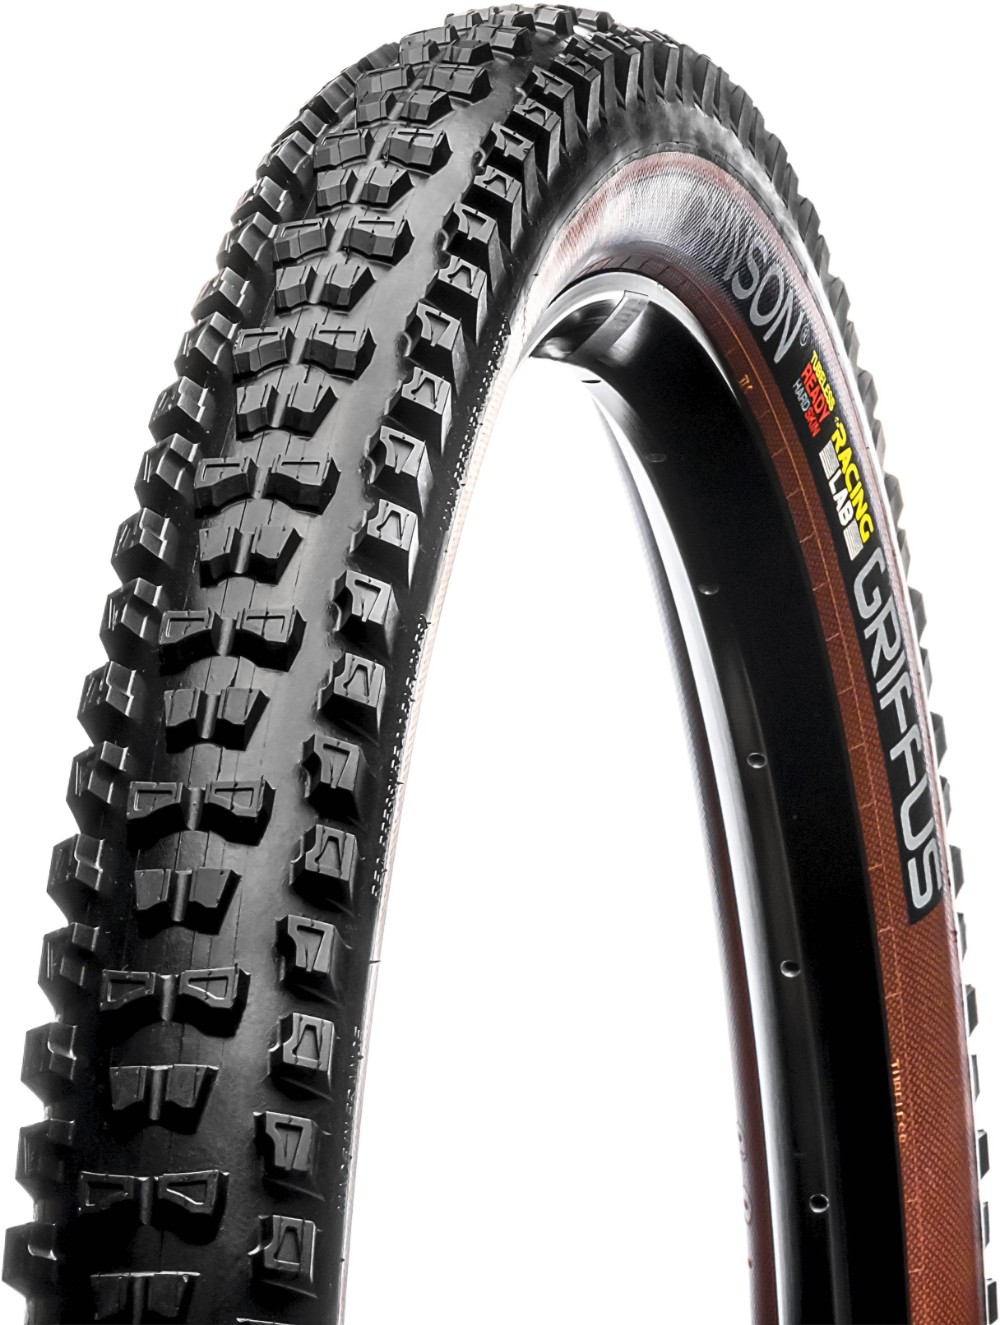 Griffus Racing Lab Tubeless Ready Hardskin RR Gravity MTB 29" Tyre image 0